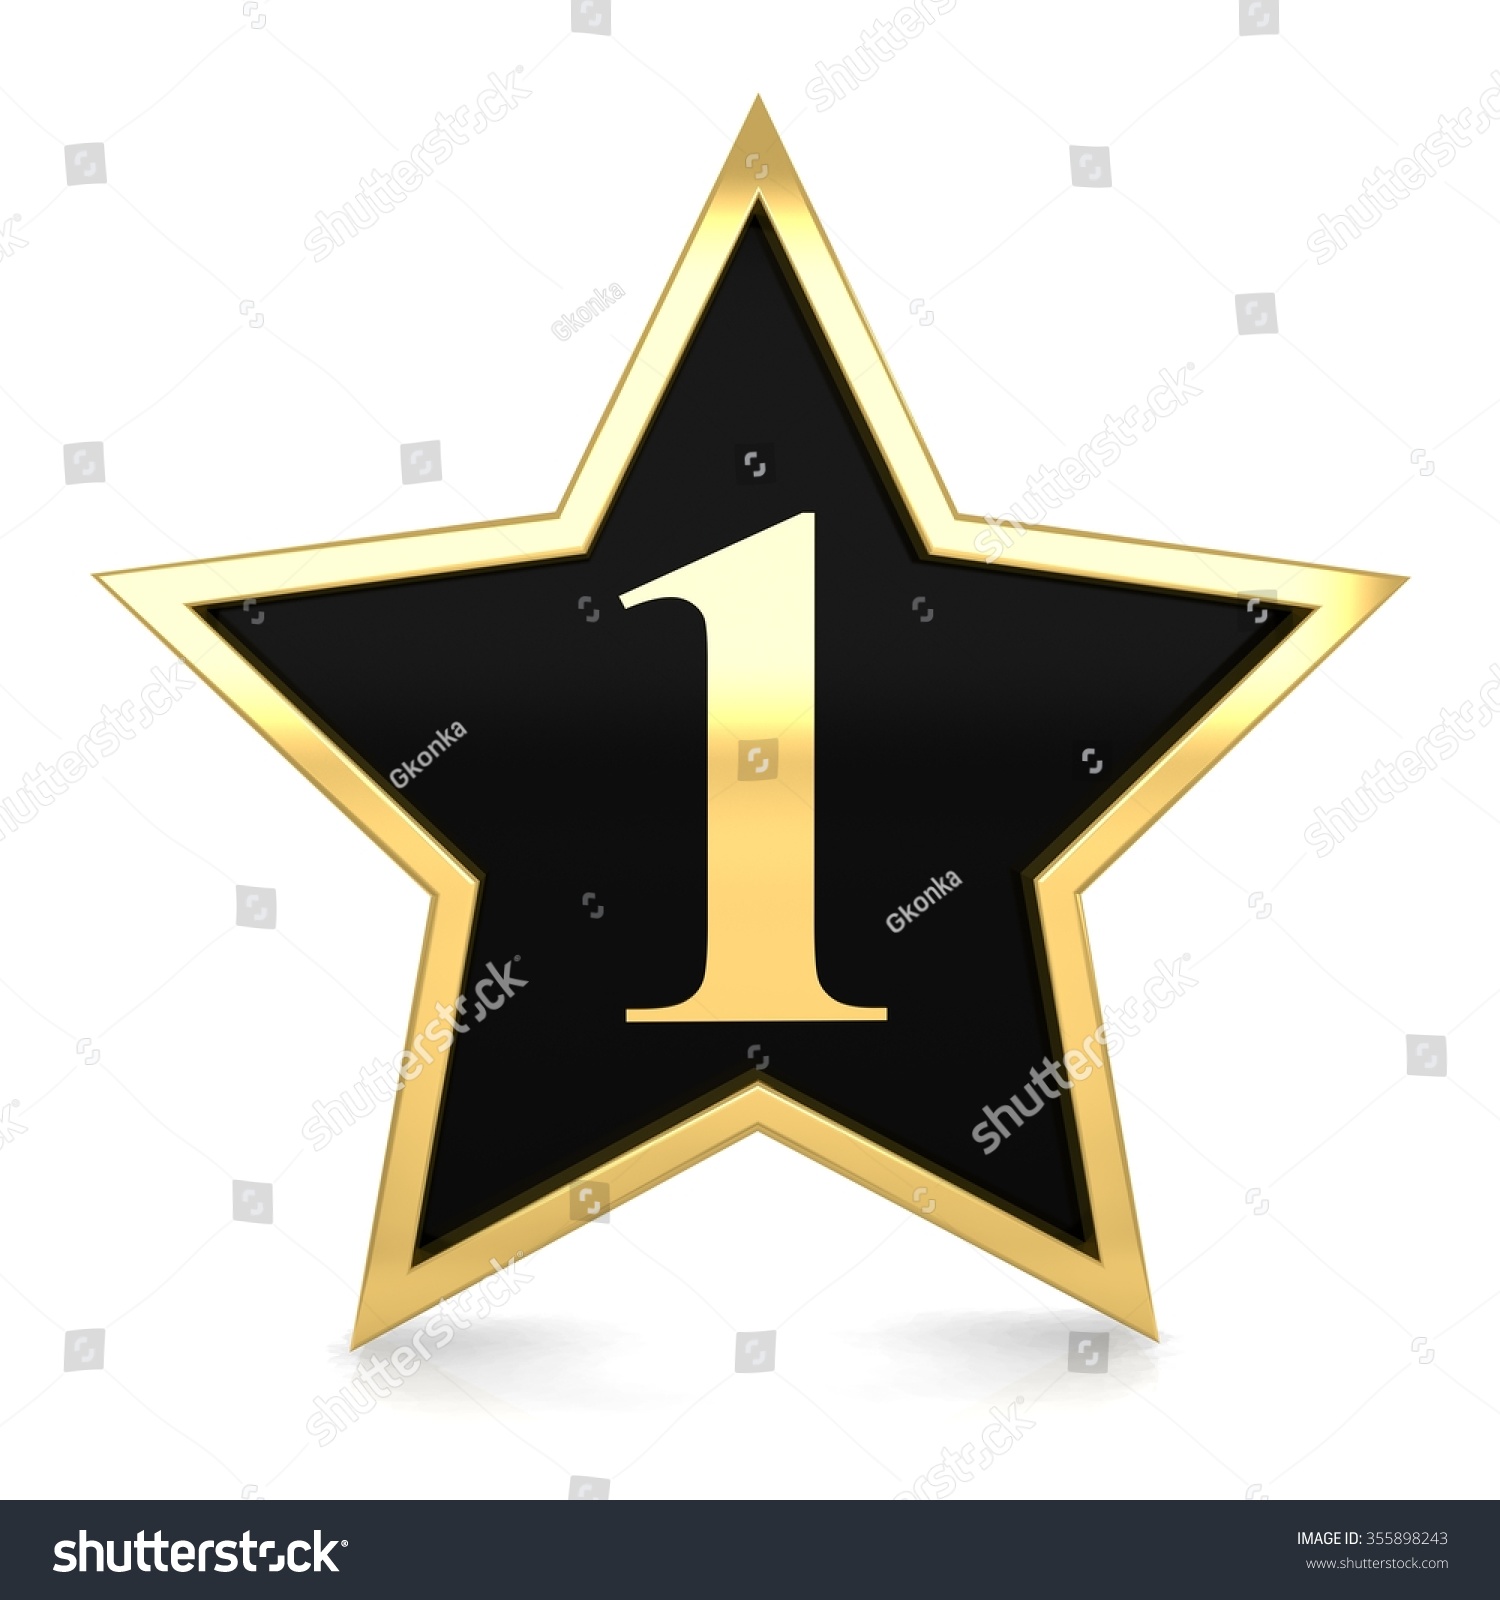 Star number. Stars and numbers. 44 CAS звезда. Star number 1. Звезда + число + звезда = 26.